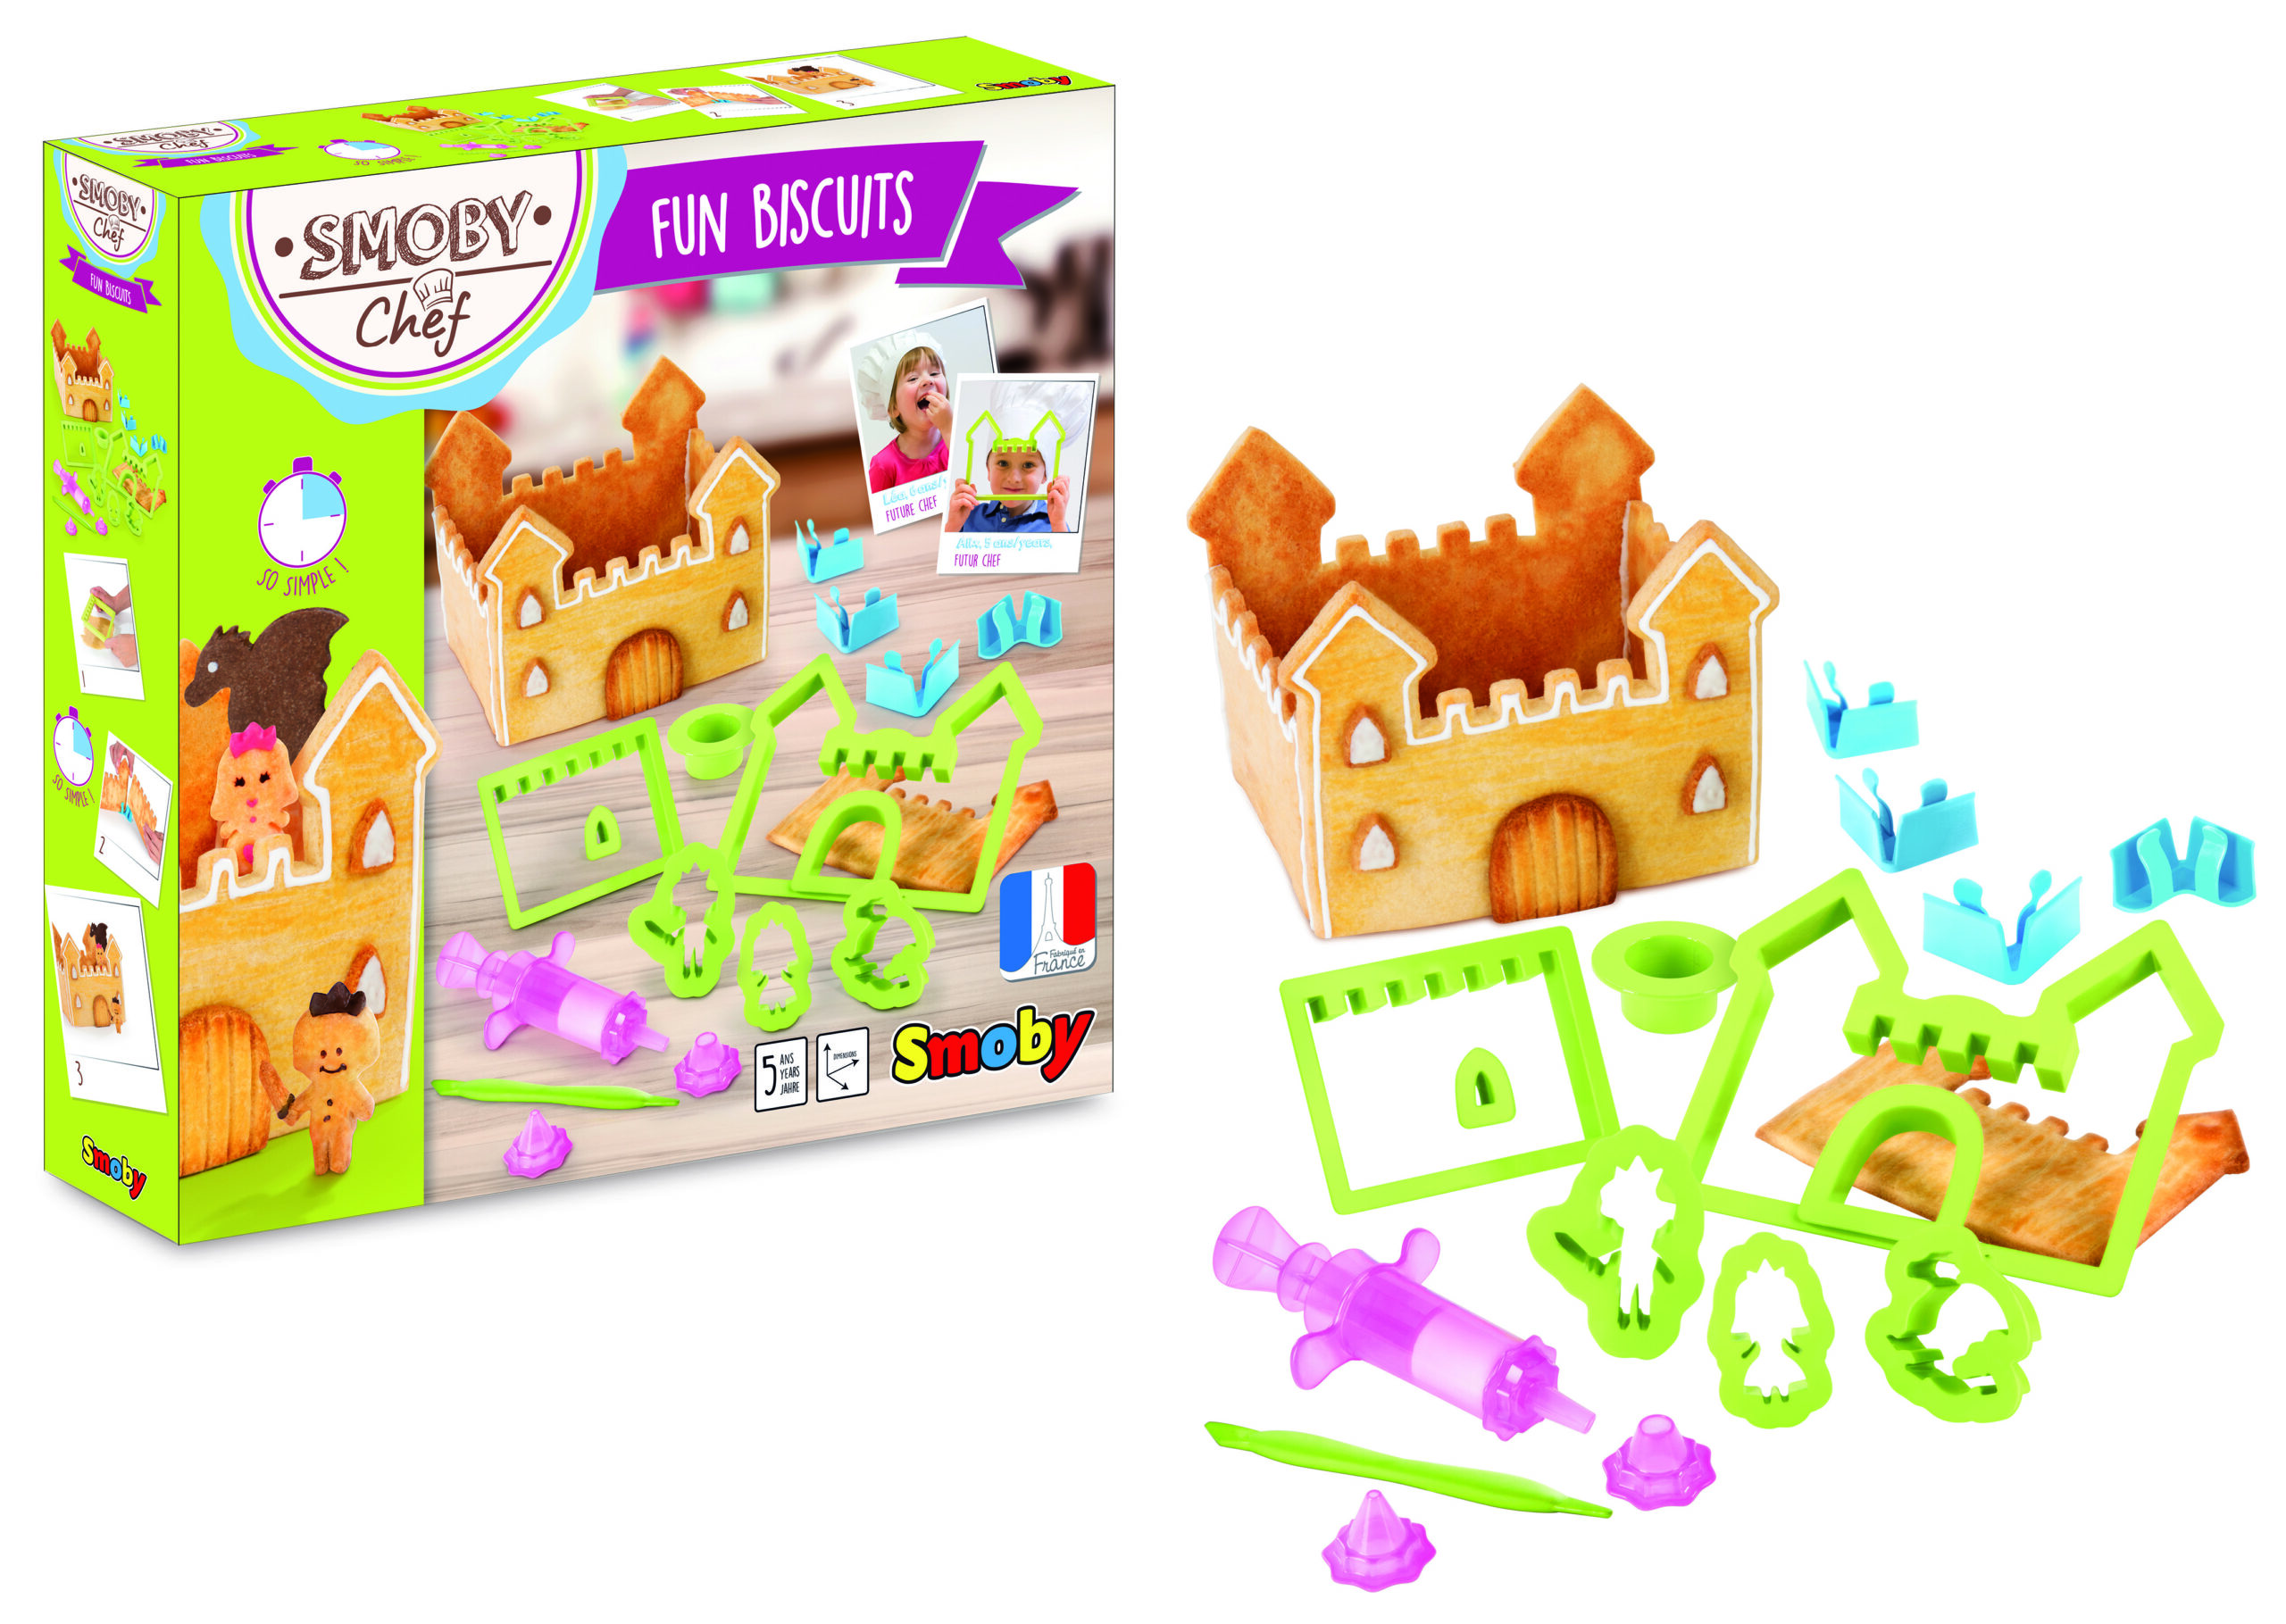 Smoby Fun Biscuits Moulds Set - Green (312100)